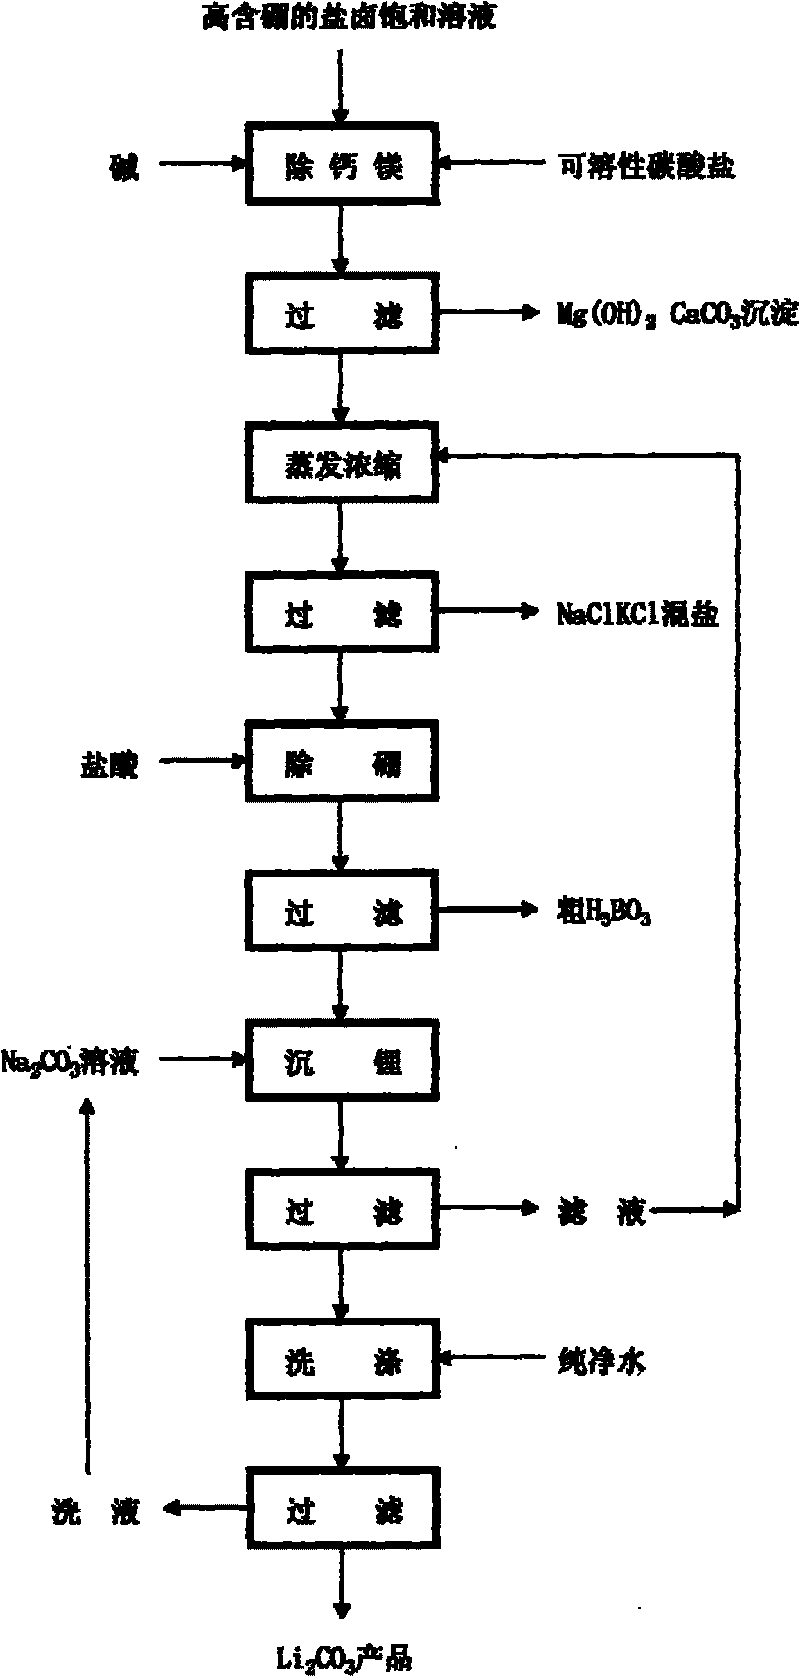 Method for preparing lithium carbonate by using high boric bittern saturated solution